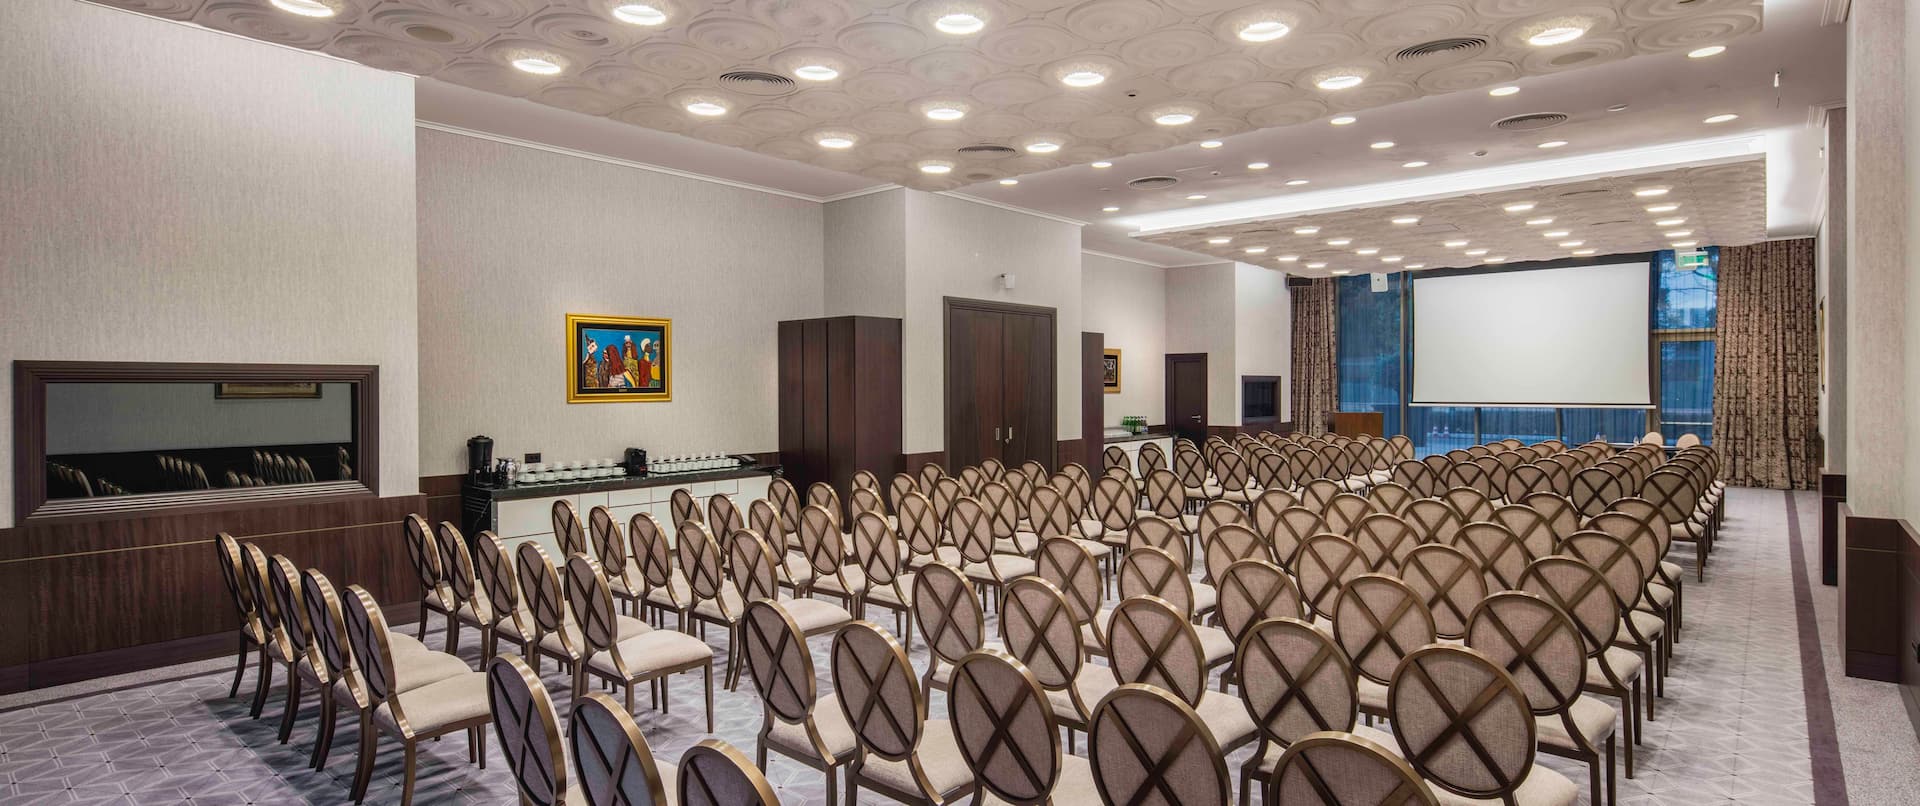 Princess Jelena Meeting Room Arranged Theater Style With Rows of Chairs Facing Projector Screen and Large WIndow